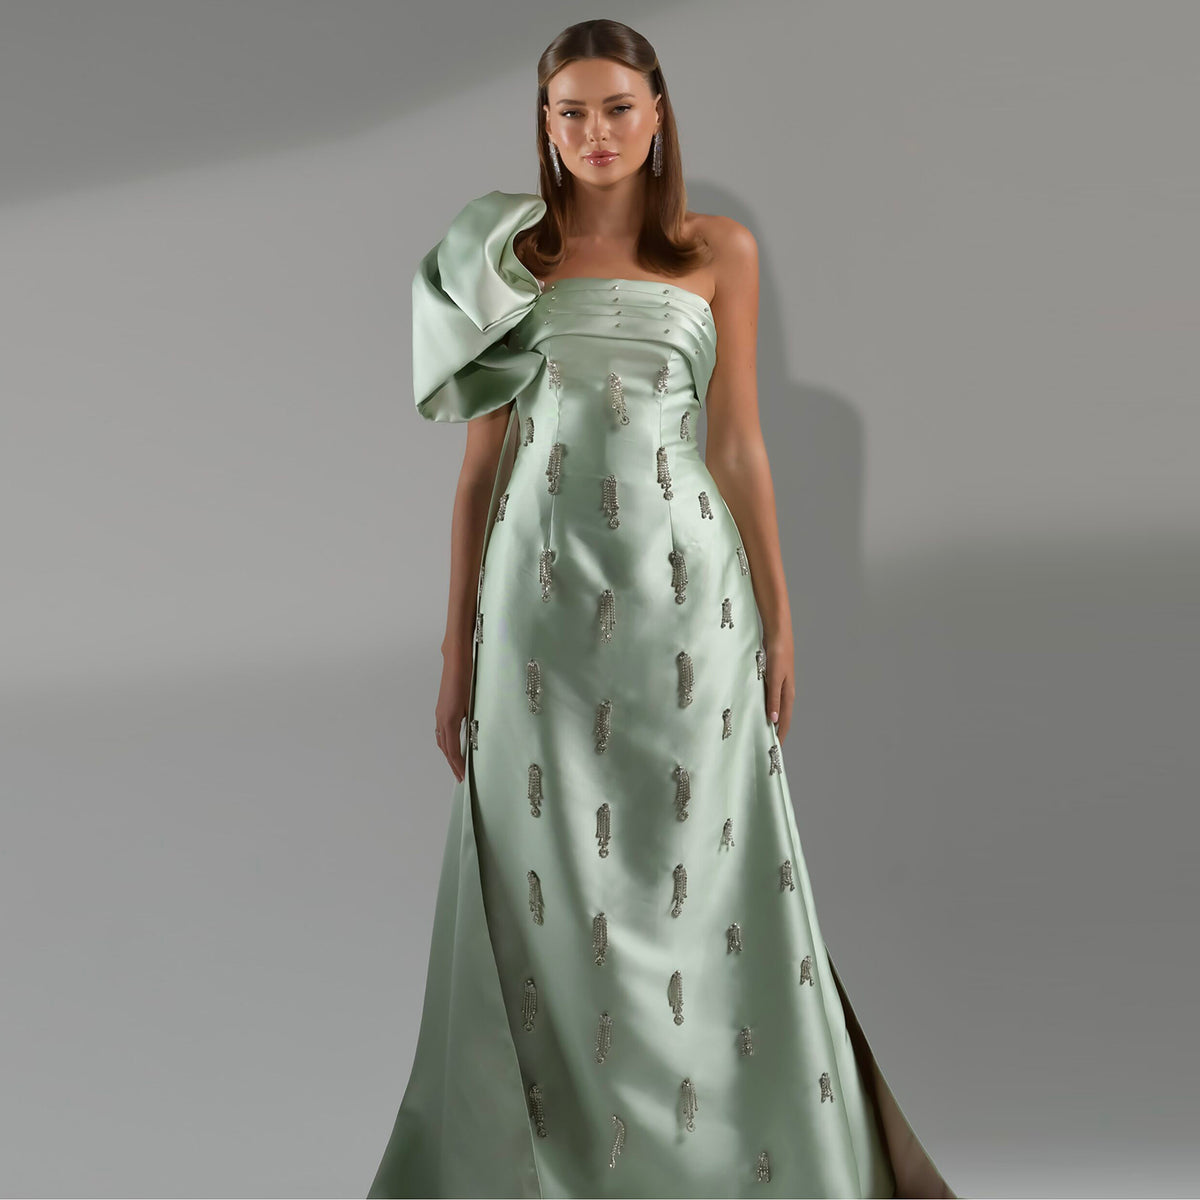 Sharon Said Arabic Sage Green One Shoulder Evening Dress with Cape Luxury Crystal Tassel Dubai Wedding Party Gowns SS368